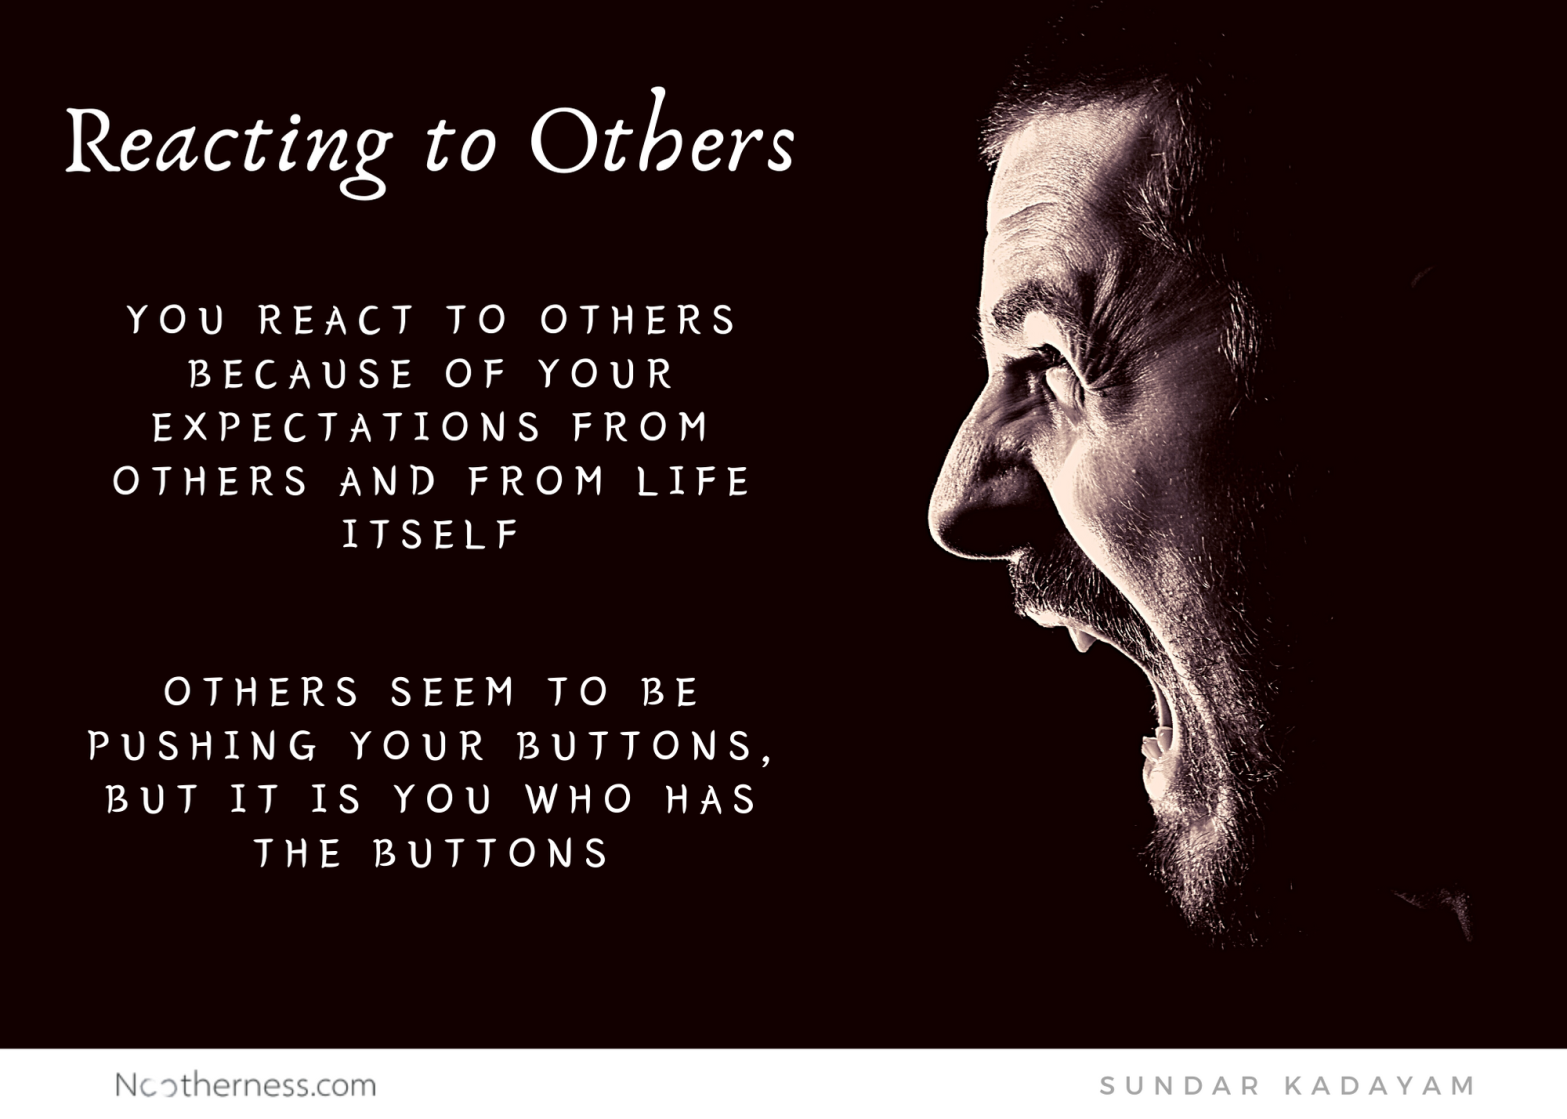 Why to you react to others? How to stop reacting to others?